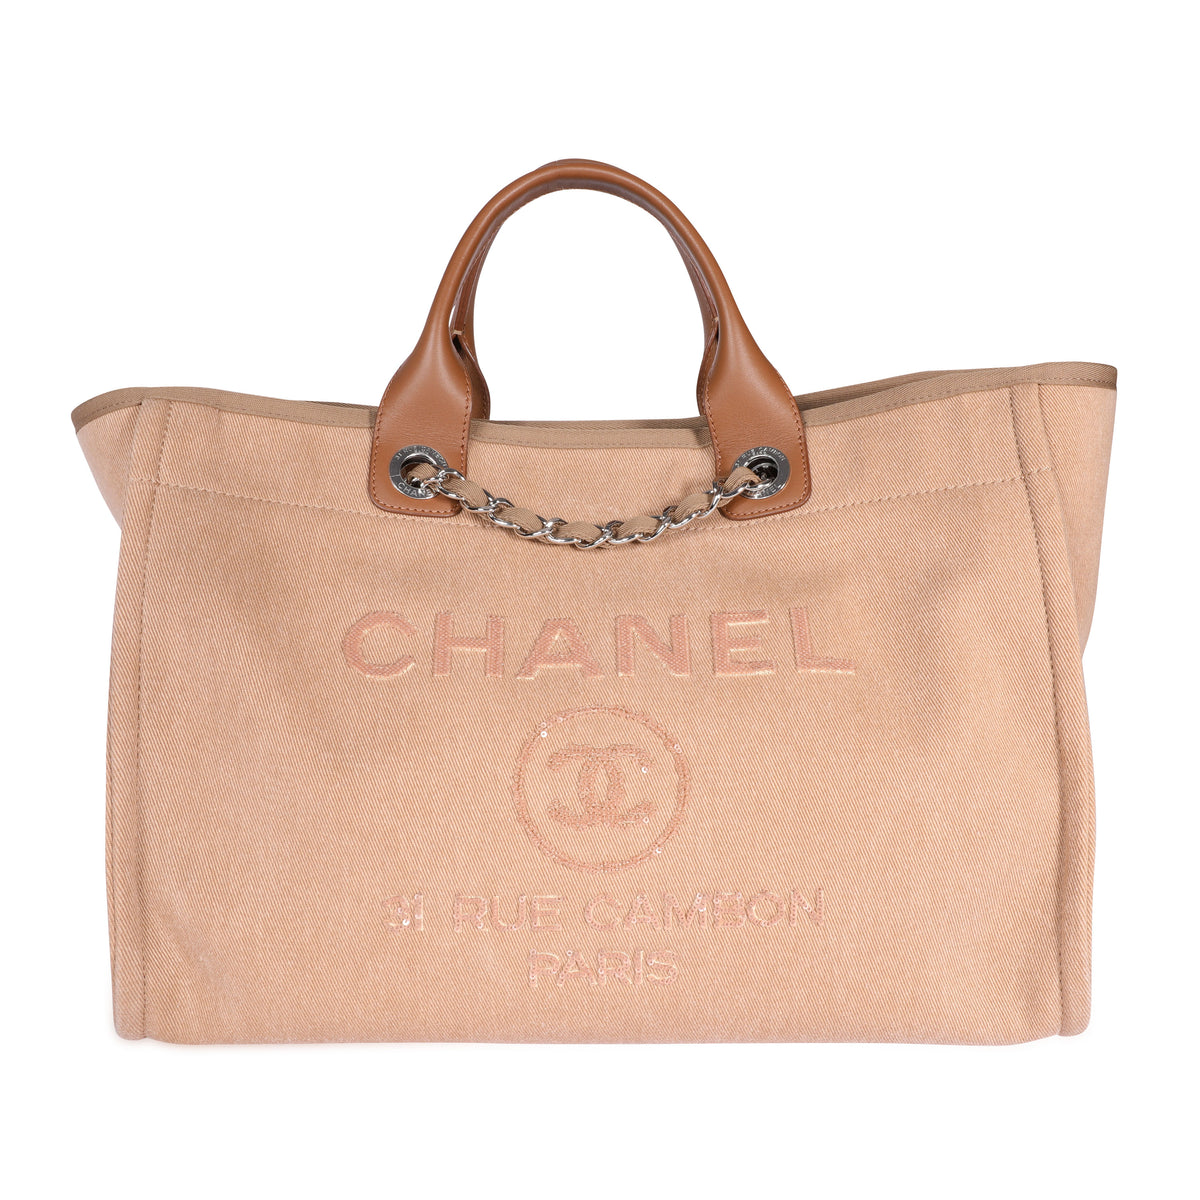 Chanel Deauville Tote, Burgundy, Leather, Mint Condition